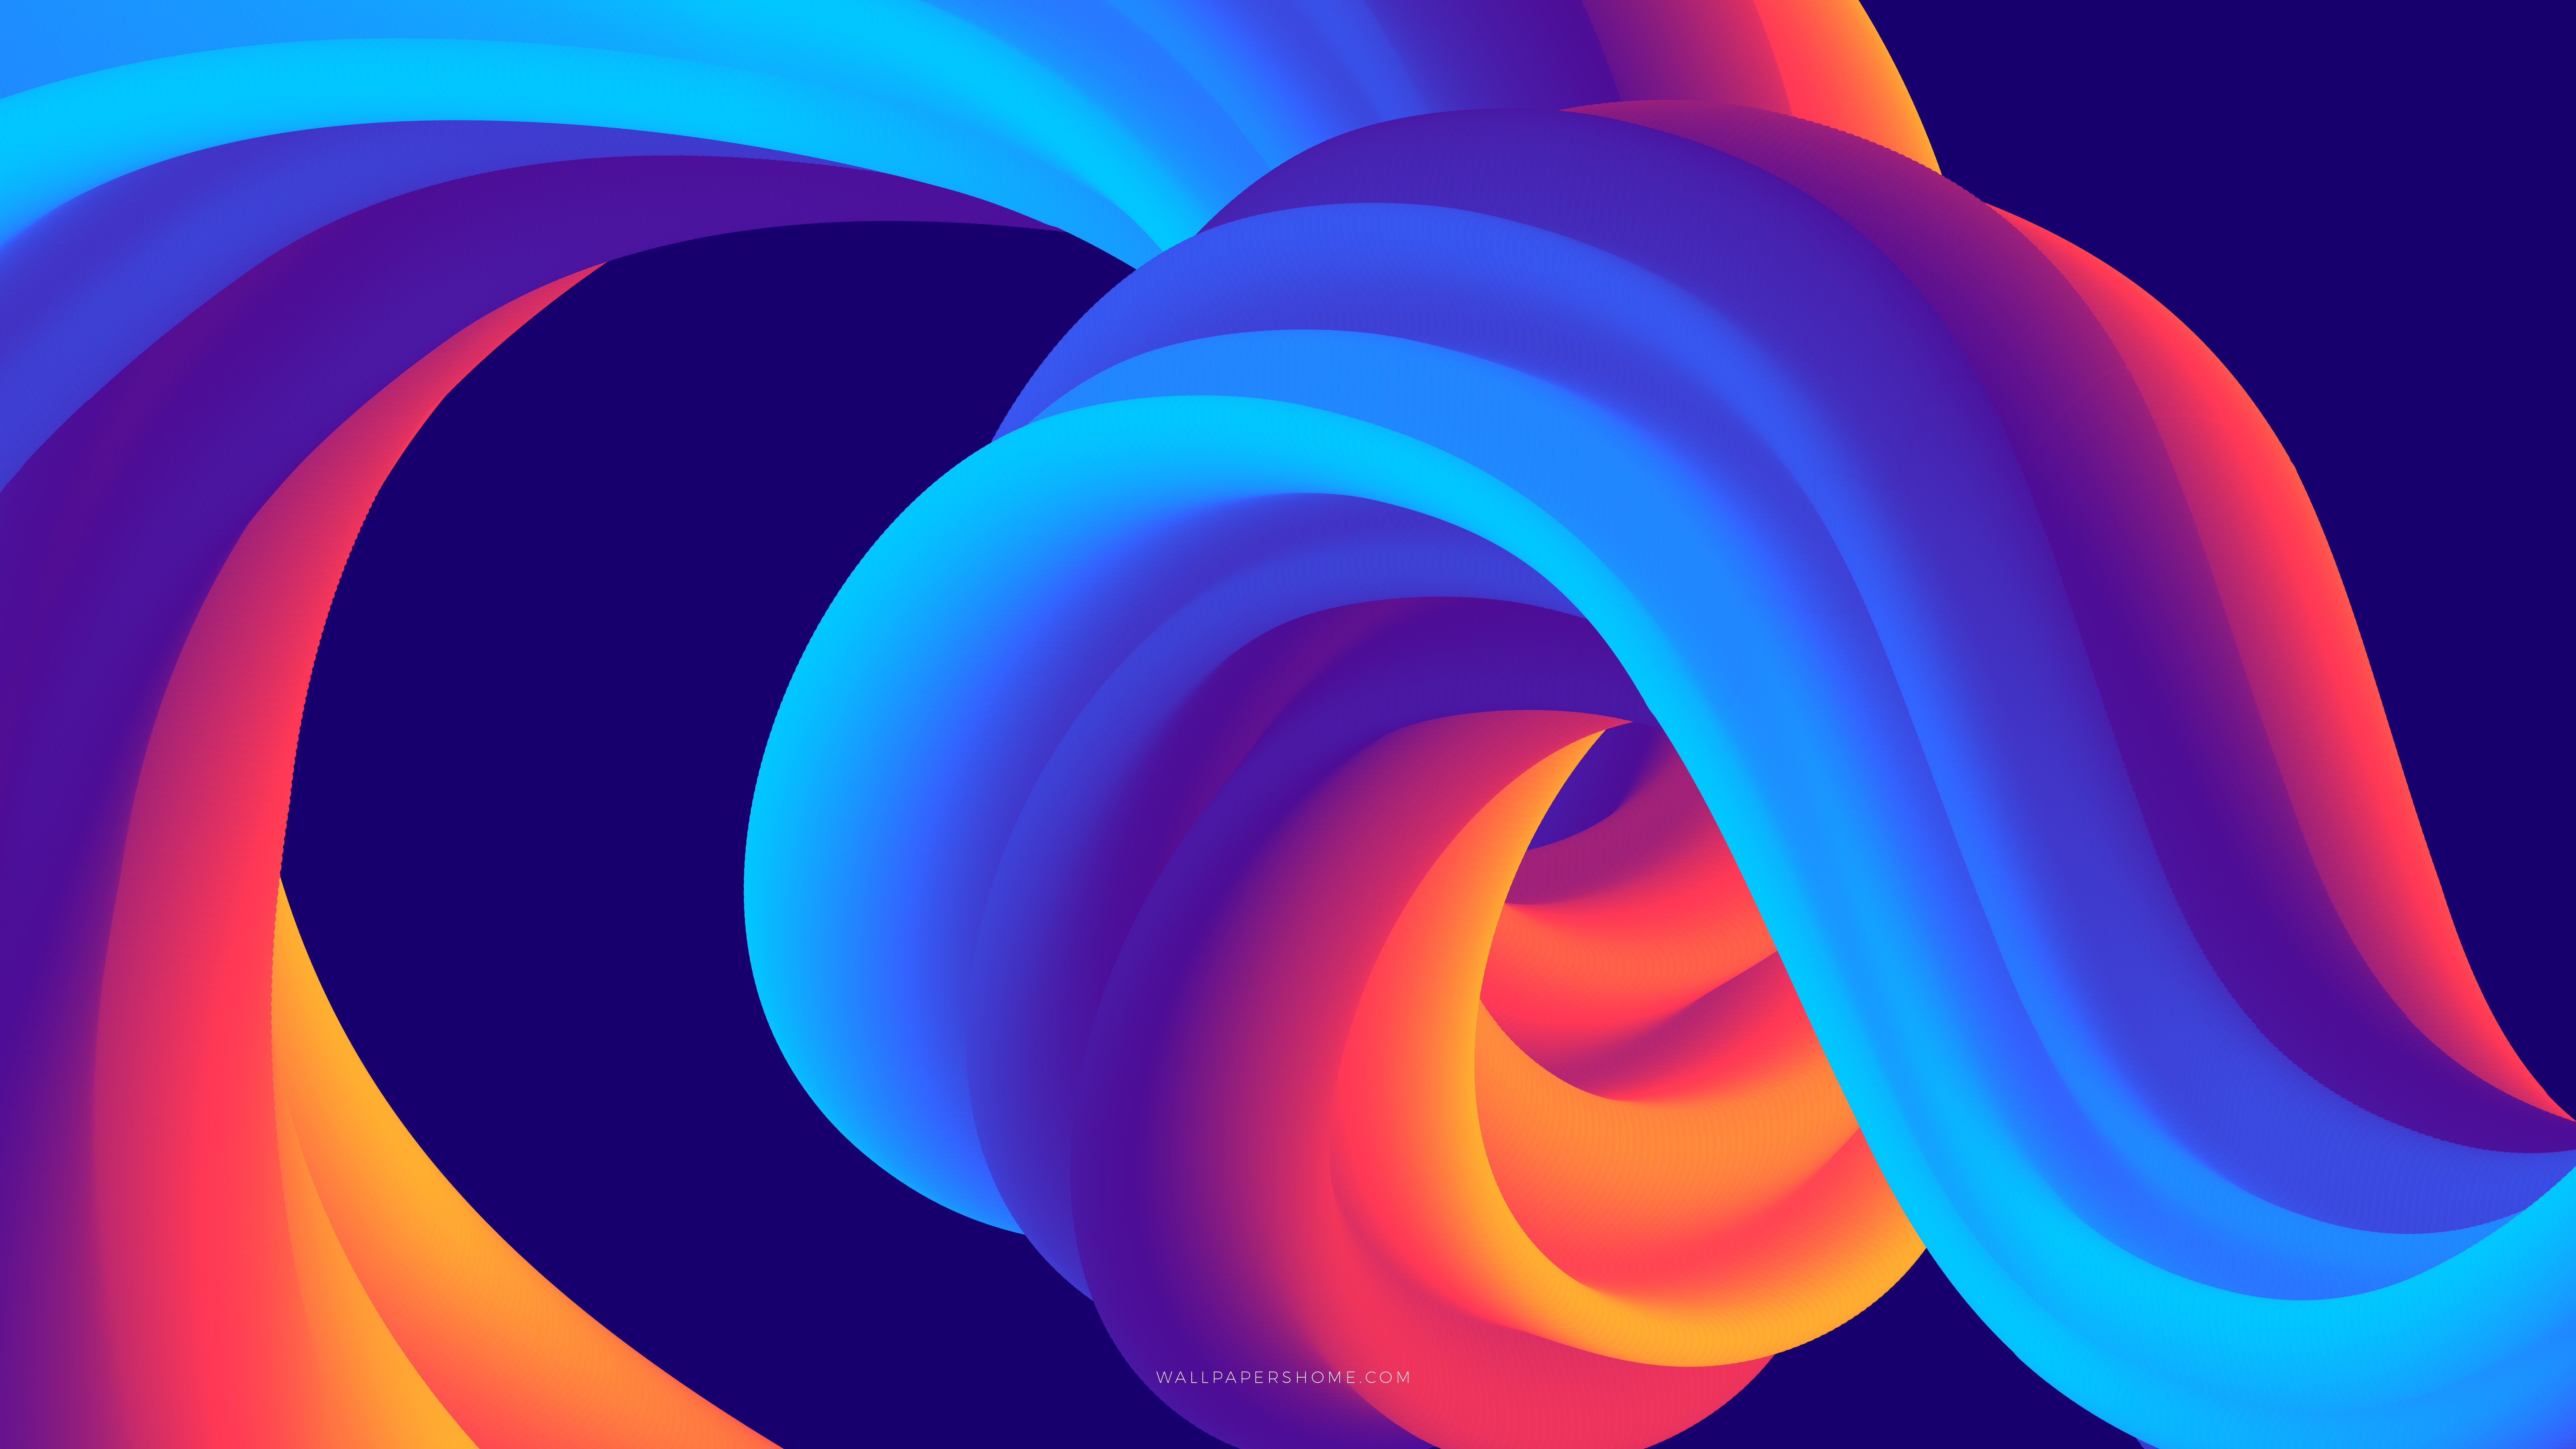 Abstract 4k Colorful Art Wallpaper Iphone - 7680x4320 Wallpaper 